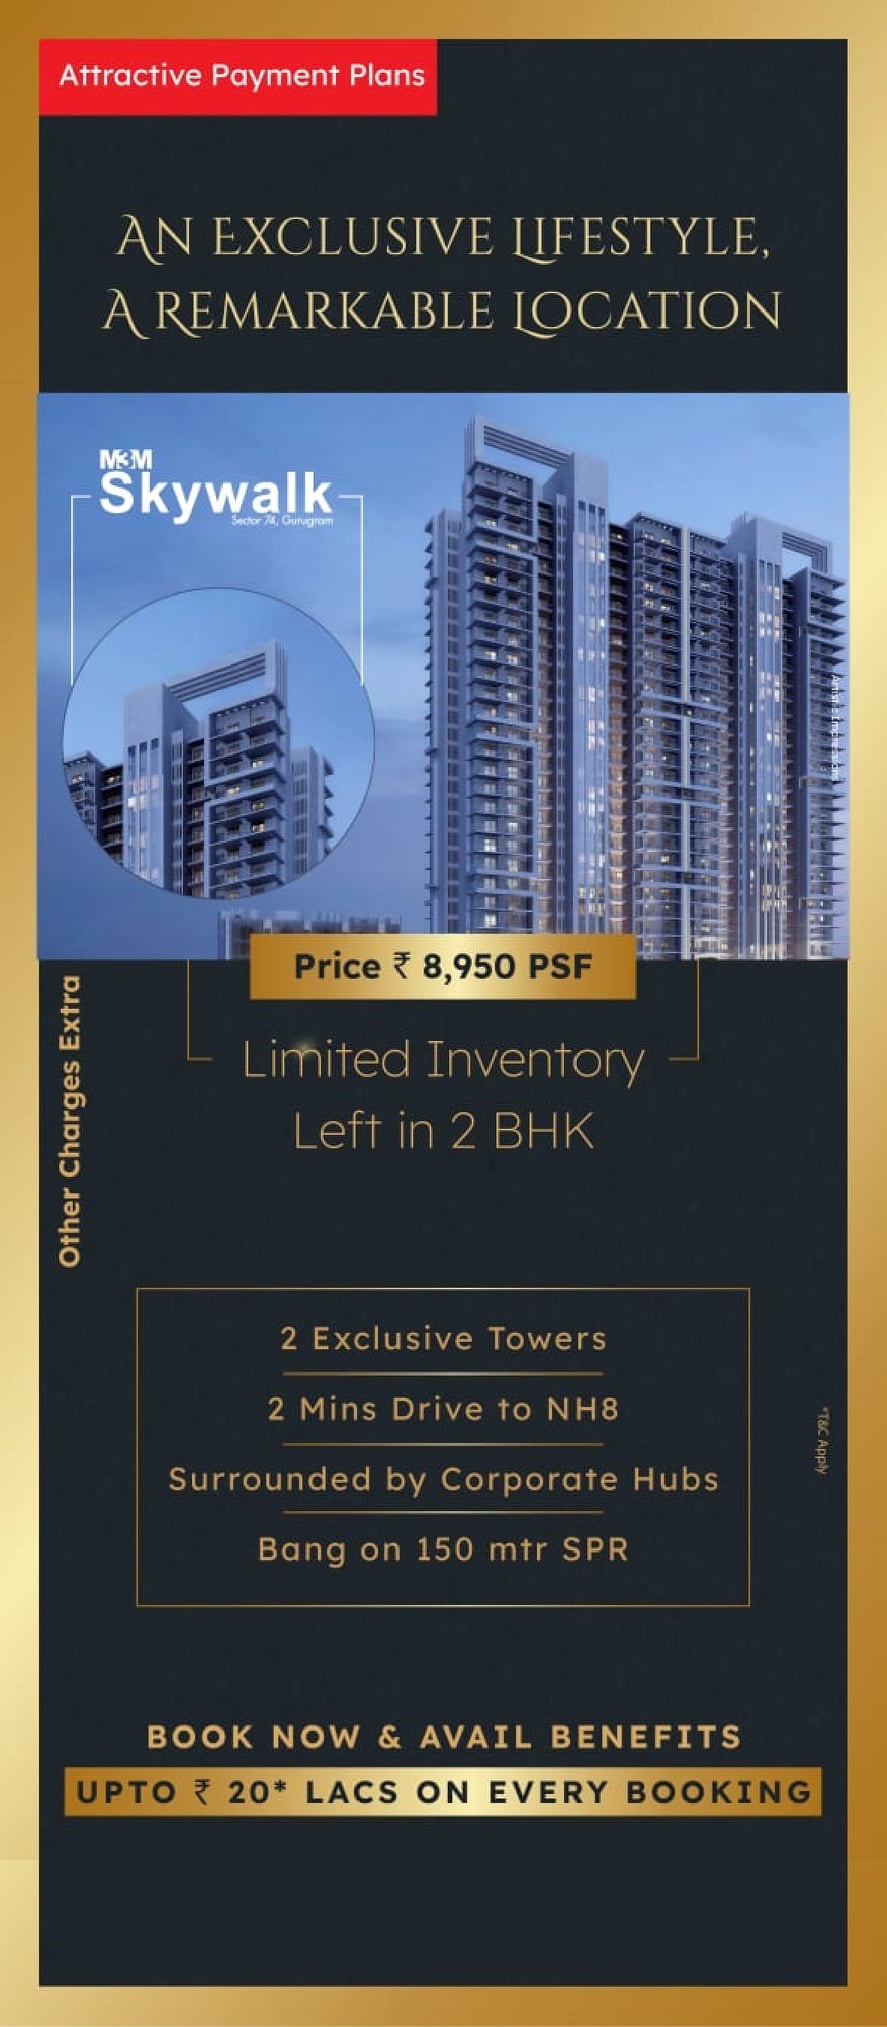 Book now & avail benefits up to Rs 20 Lacs on every booking at M3M Skywalk in Sector 74, Gurgaon